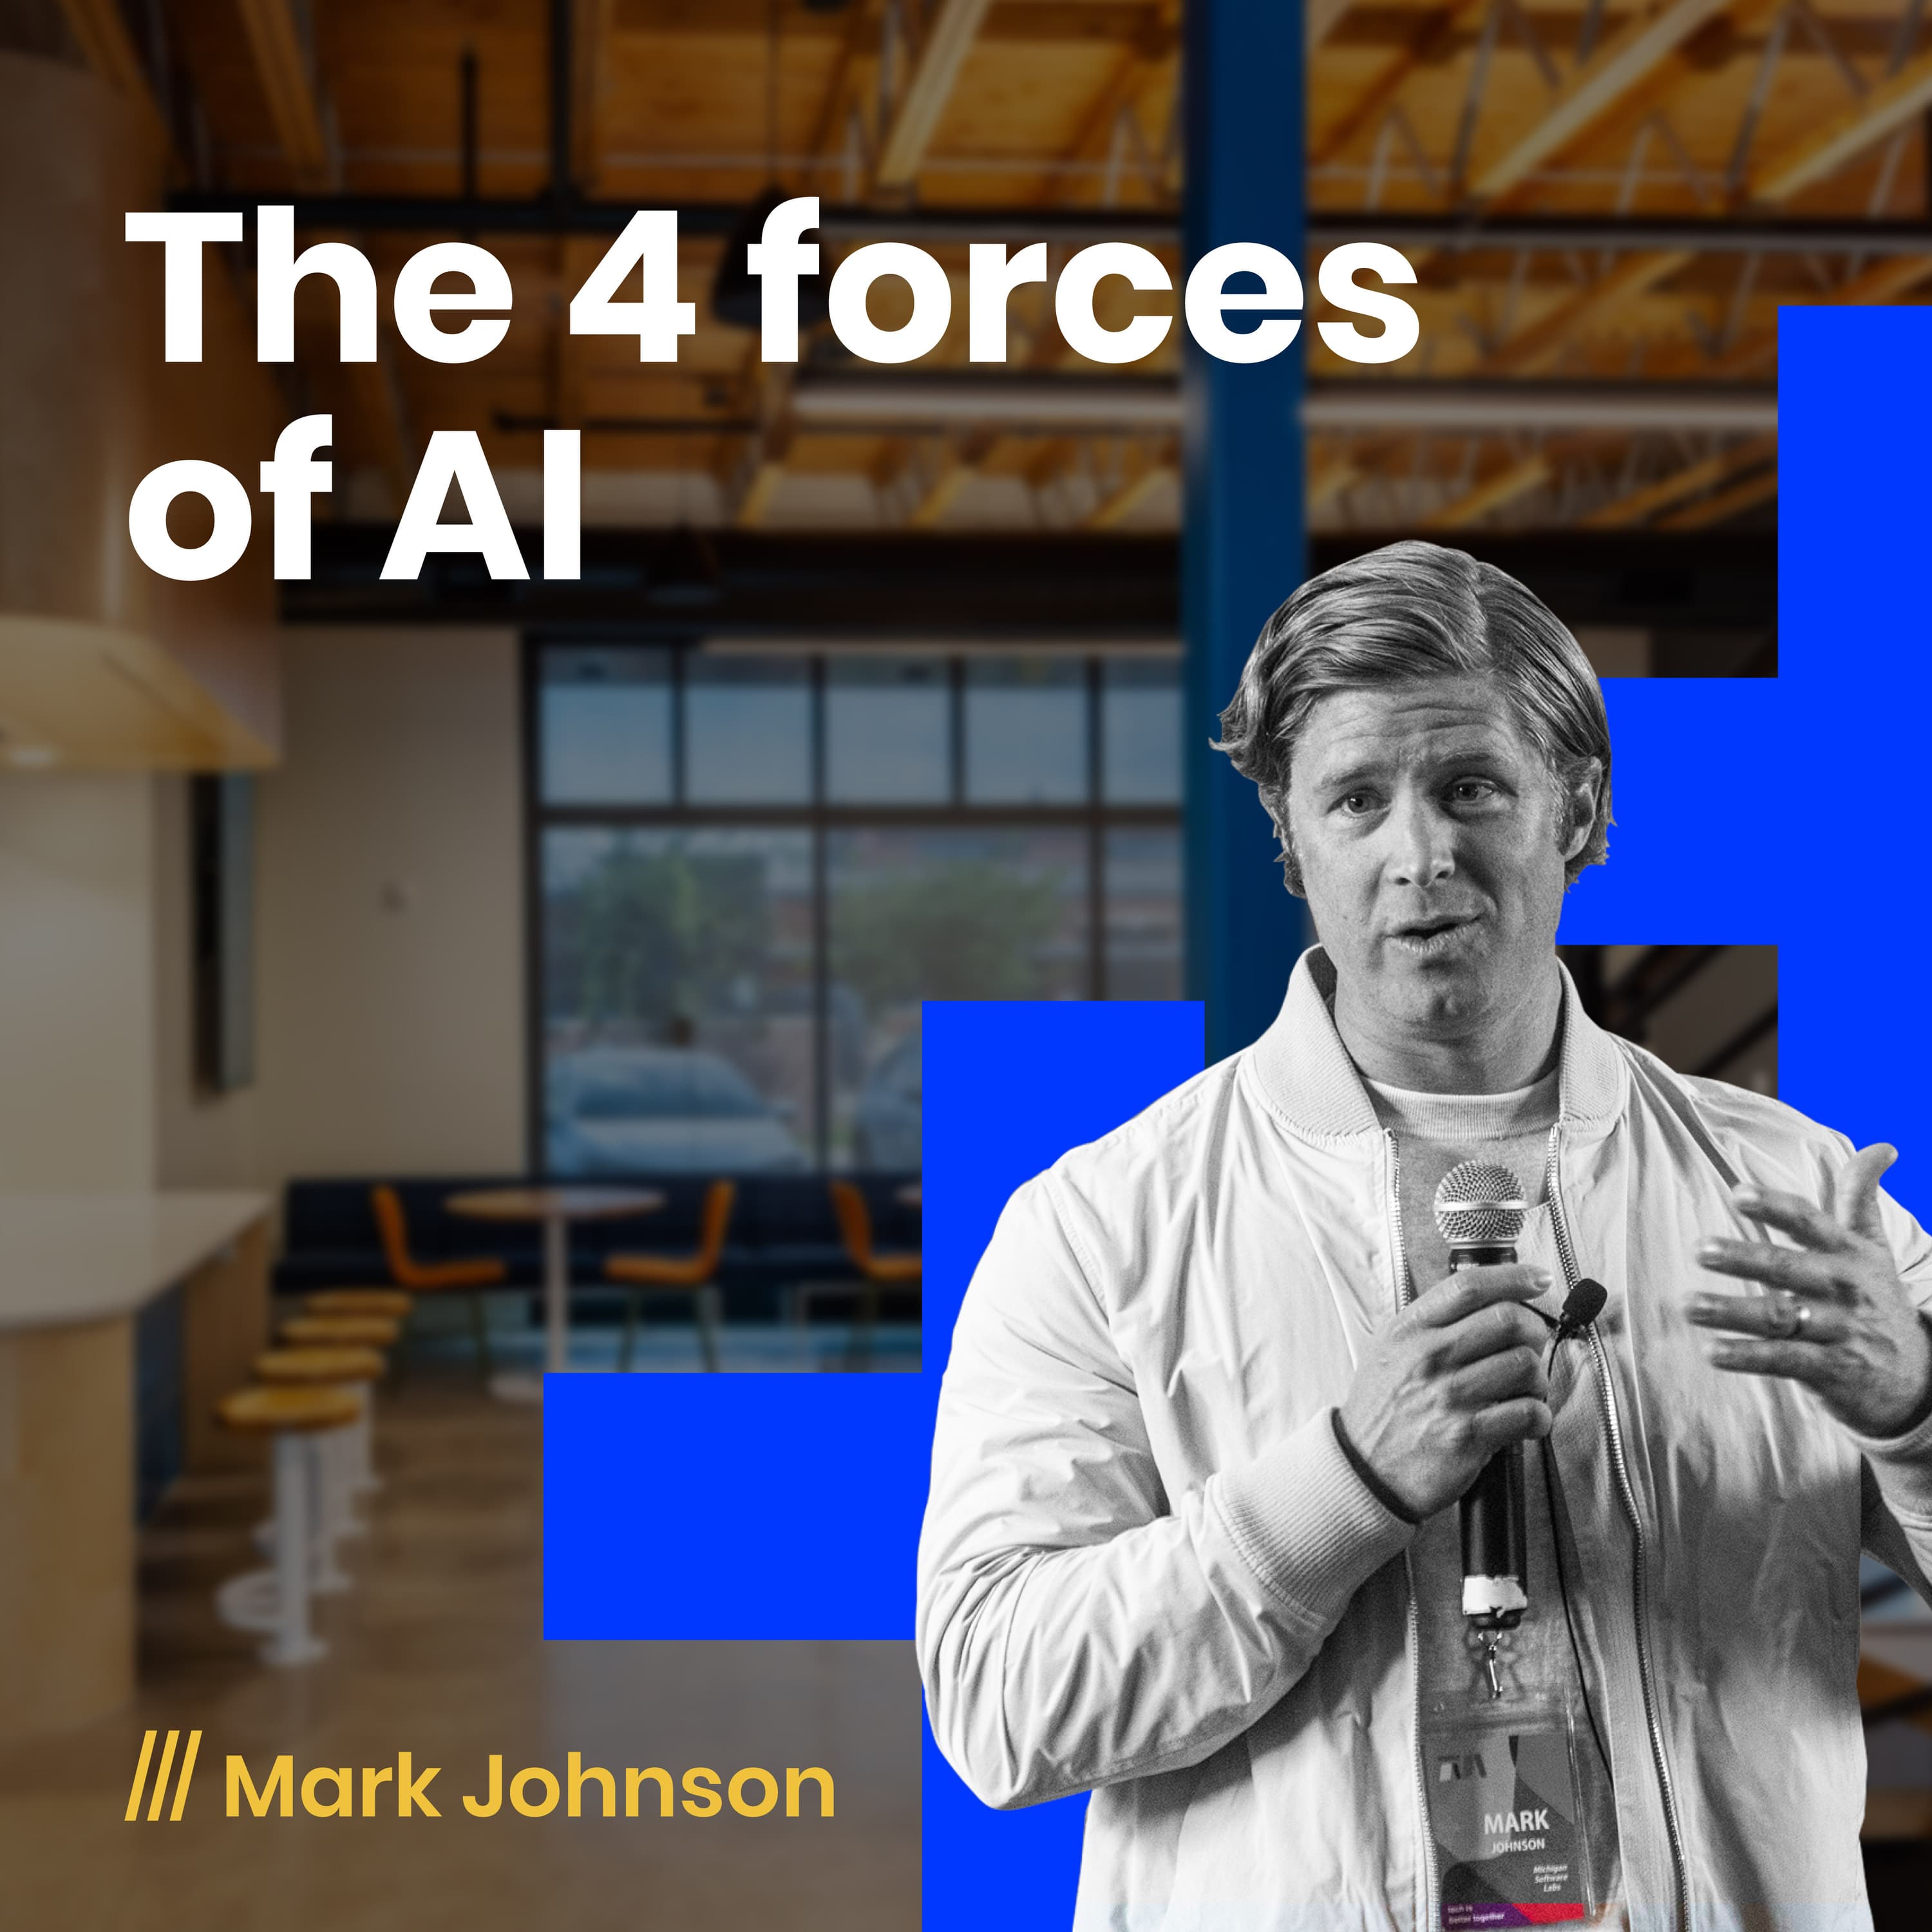 Simplifying the 4 forces of AI